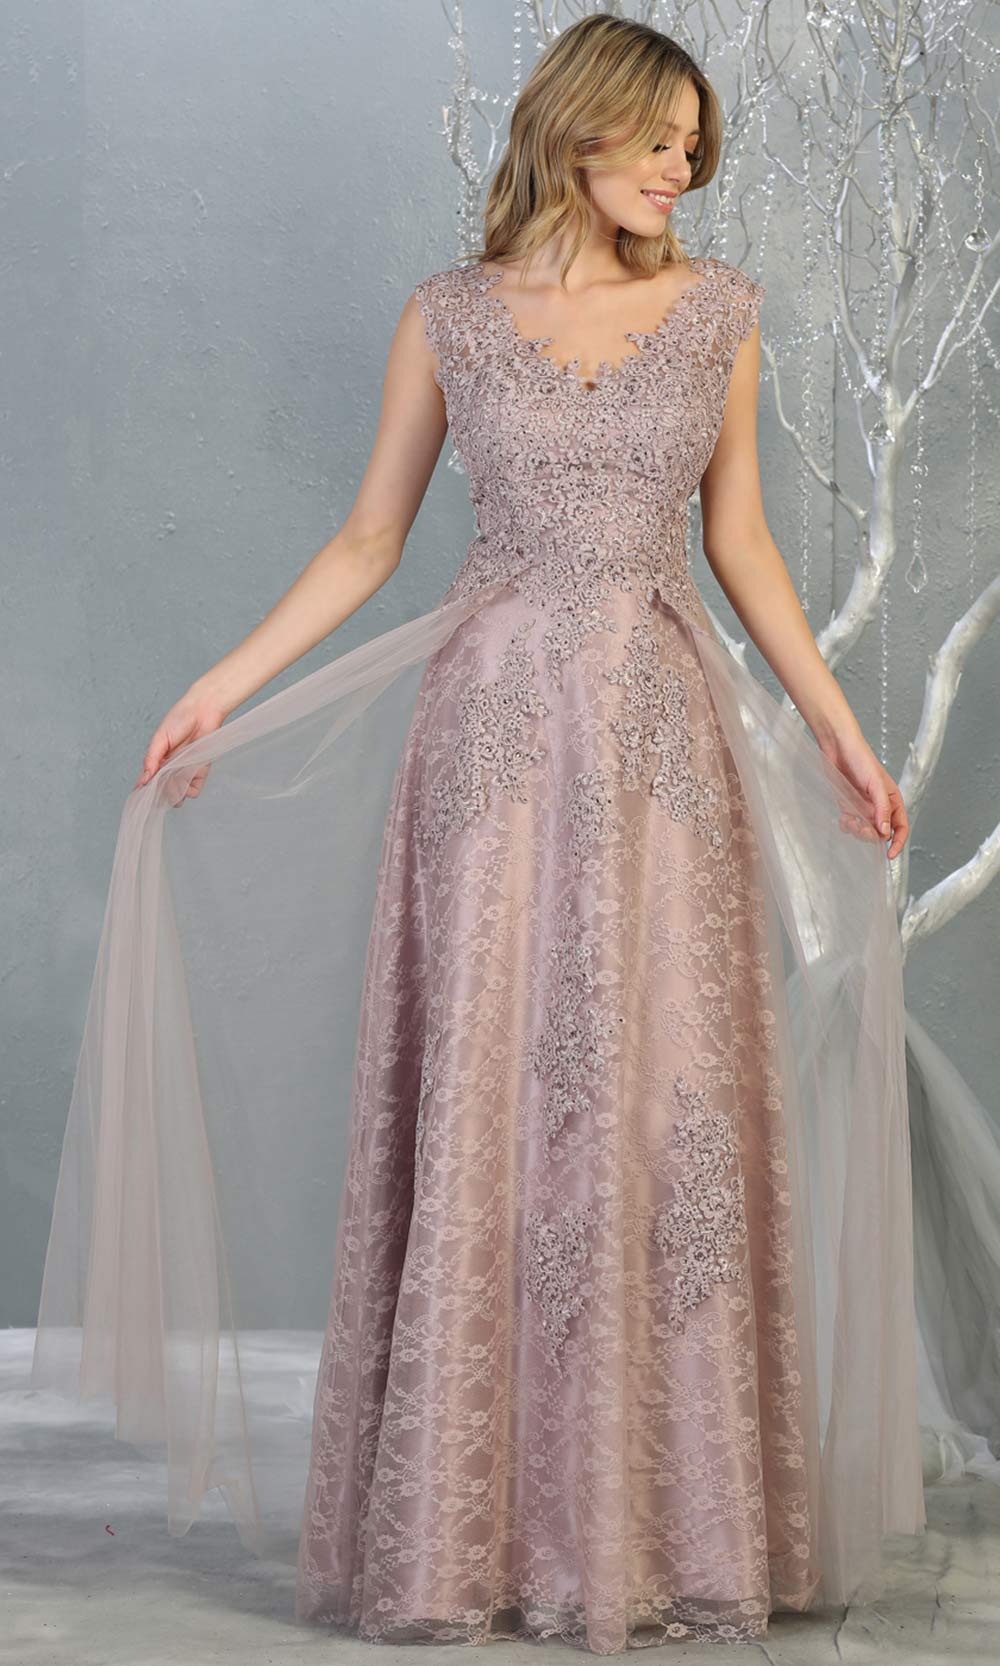 Mayqueen MQ1799 long mauve v neck evening fitted dress. Full length dusty rose lace gown w/skirt overlay is perfect for  enagagement/e-shoot dress, formal wedding guest, indowestern gown, evening party dress, prom, bridesmaid. Plus sizes avail-2.jpg